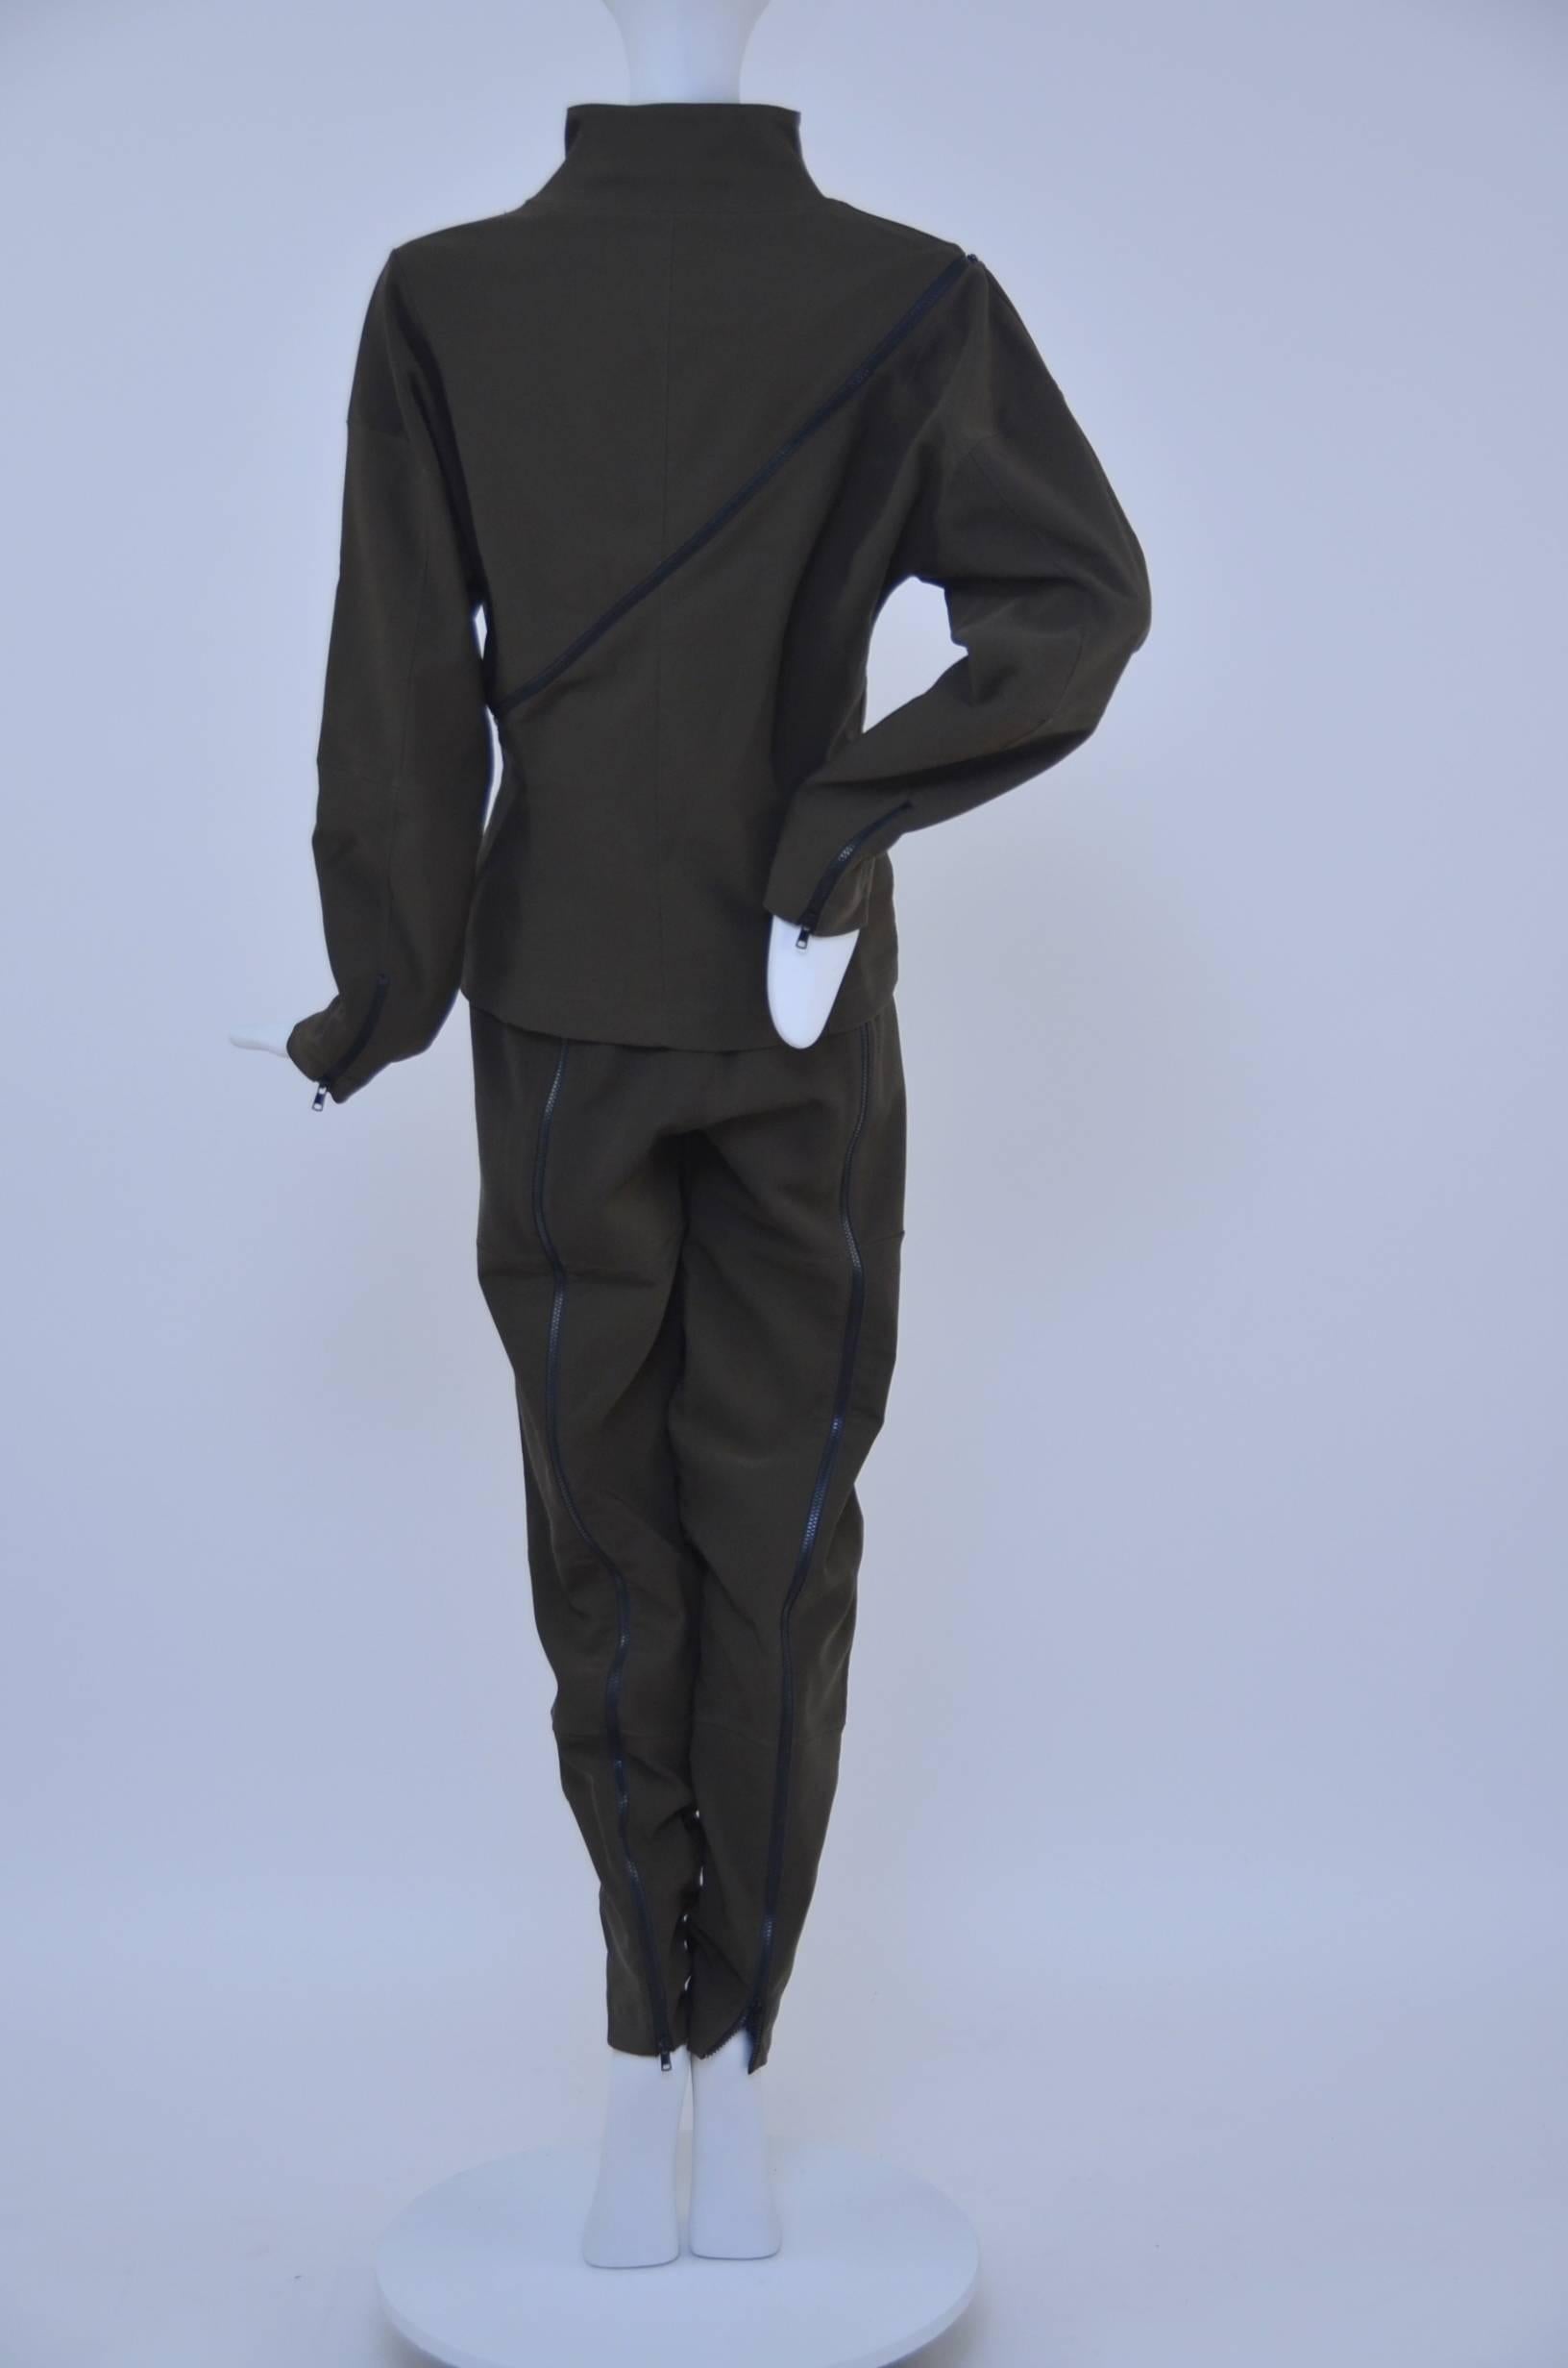 Issey  Miyake runway  zipper  suit.Very unique interesting design.
Jacket has multiple zippers, on the collar, sleeve and one large zipper that goes form the front to the back.Pants have 2 little zippers in the front and large zippers on the back